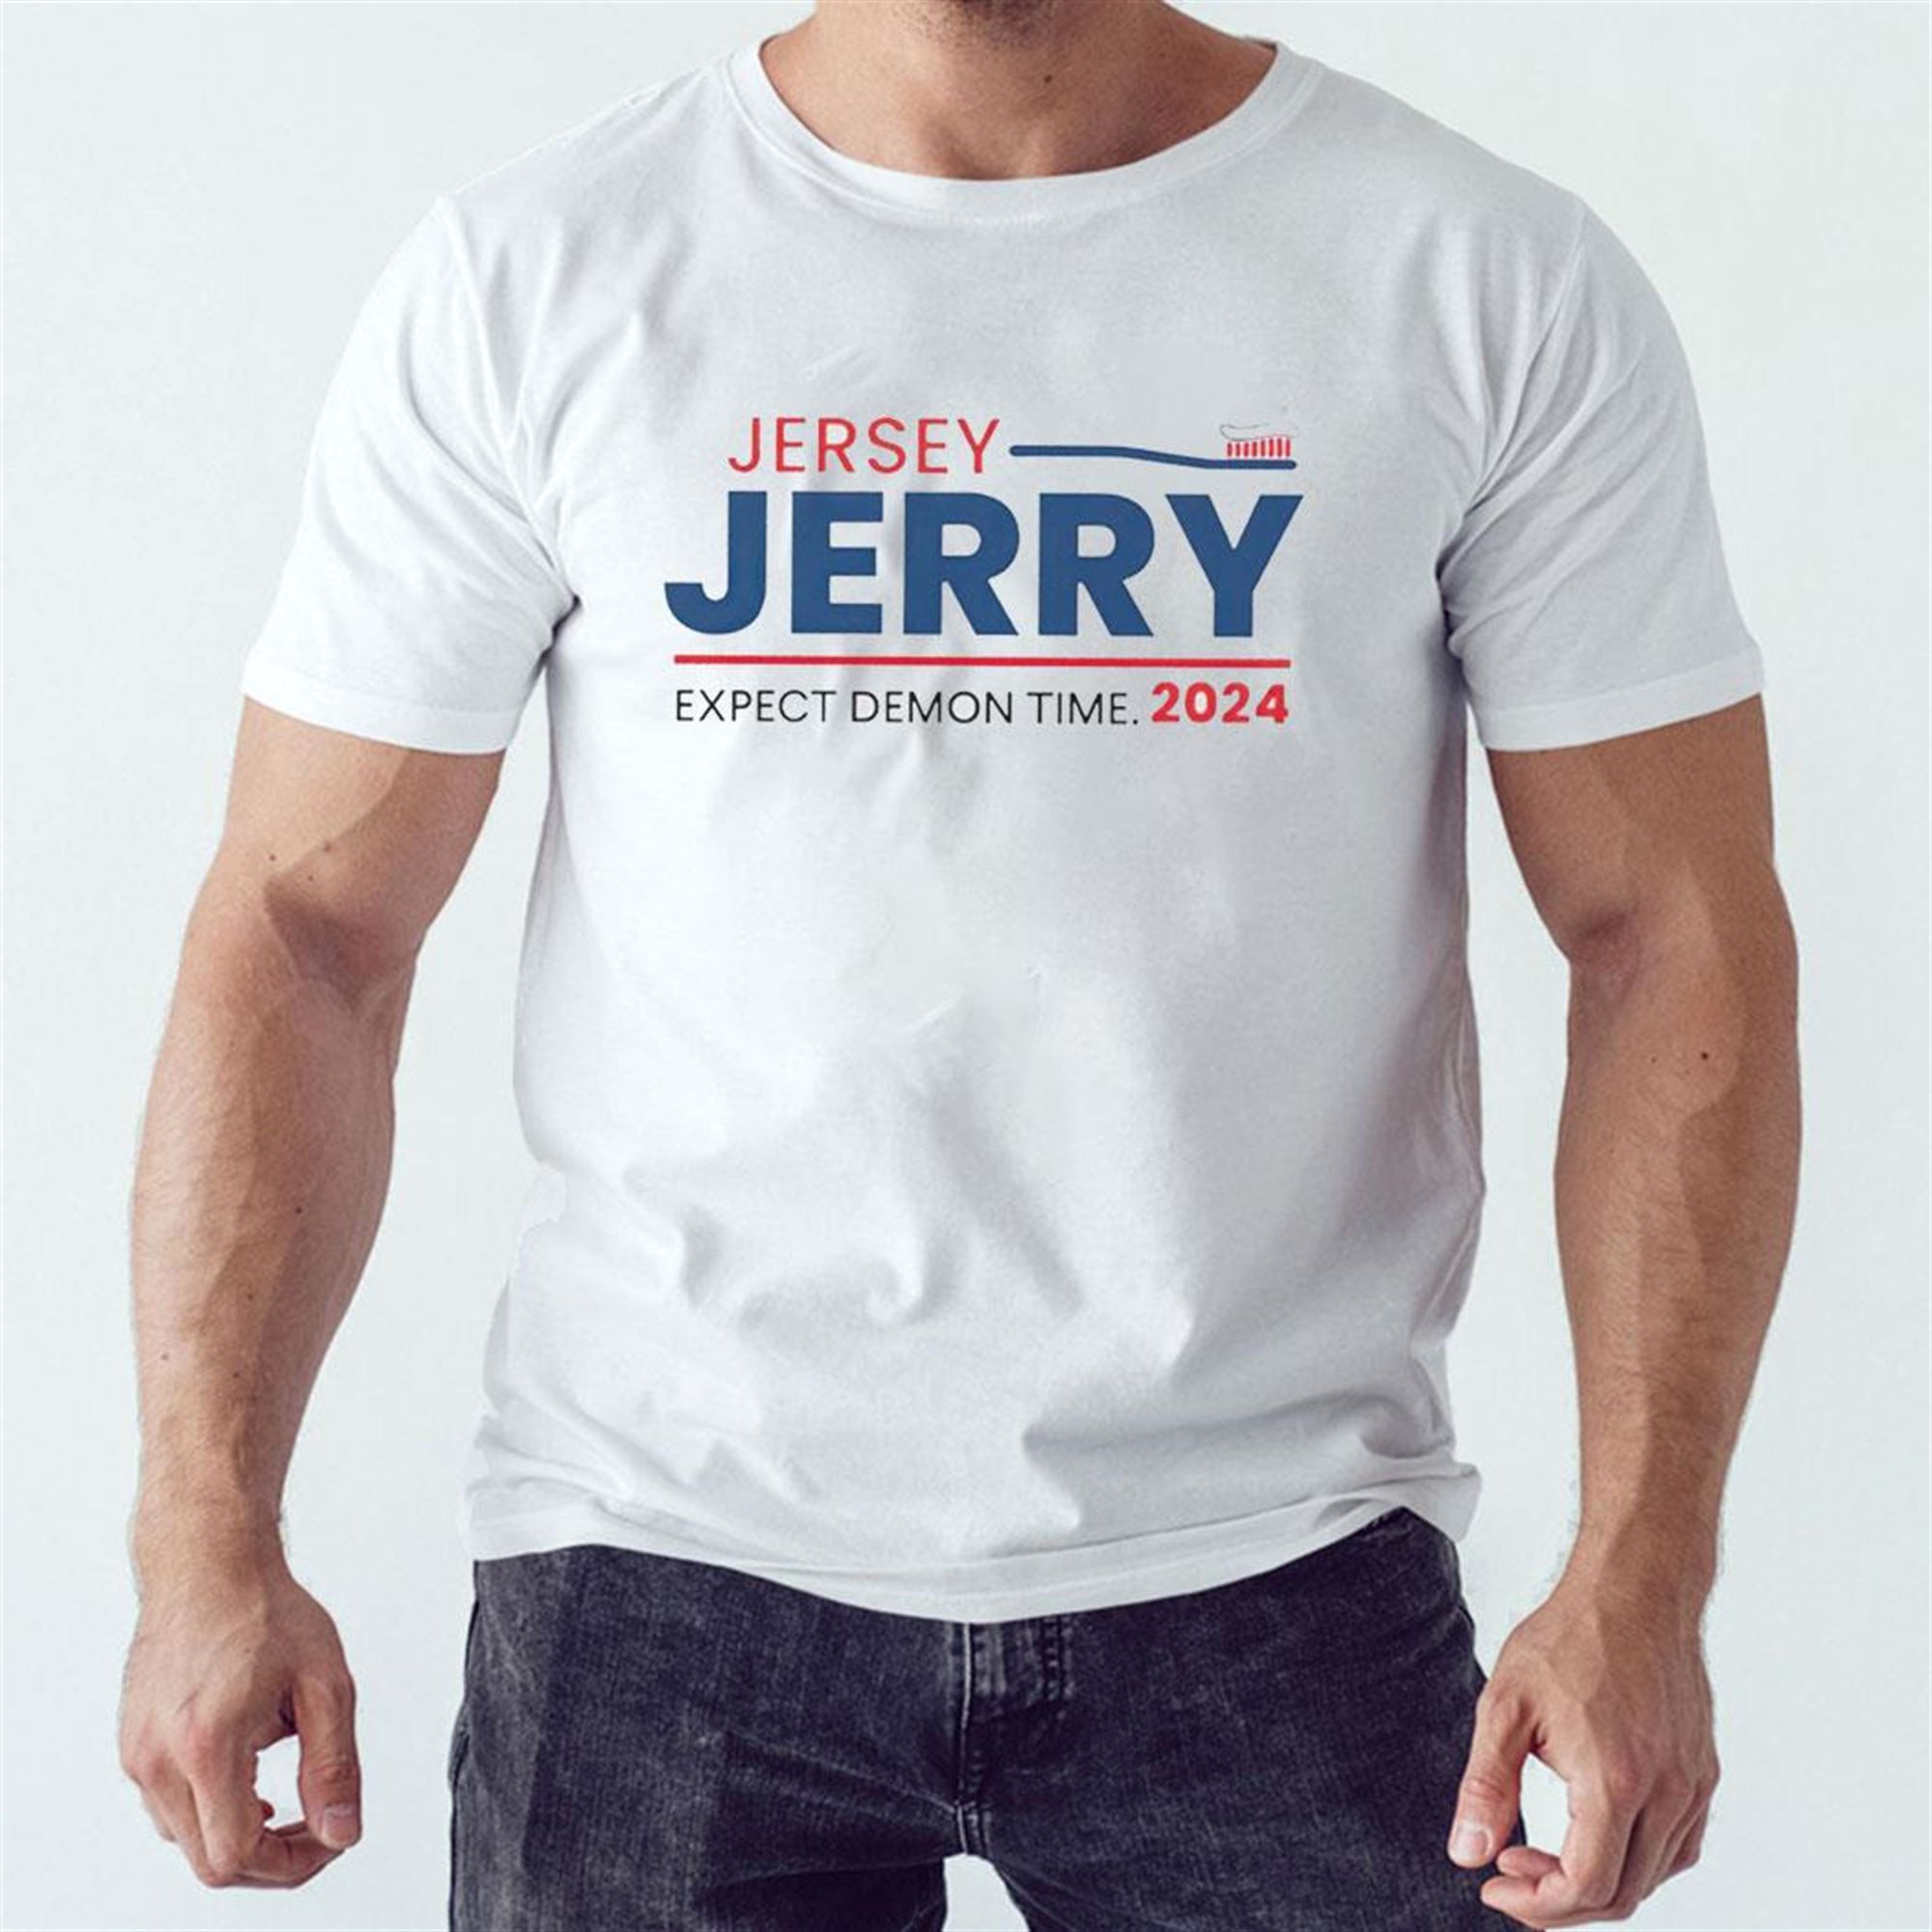 Official Jersey Jerry Expect Demon Time 2024 T-shirt